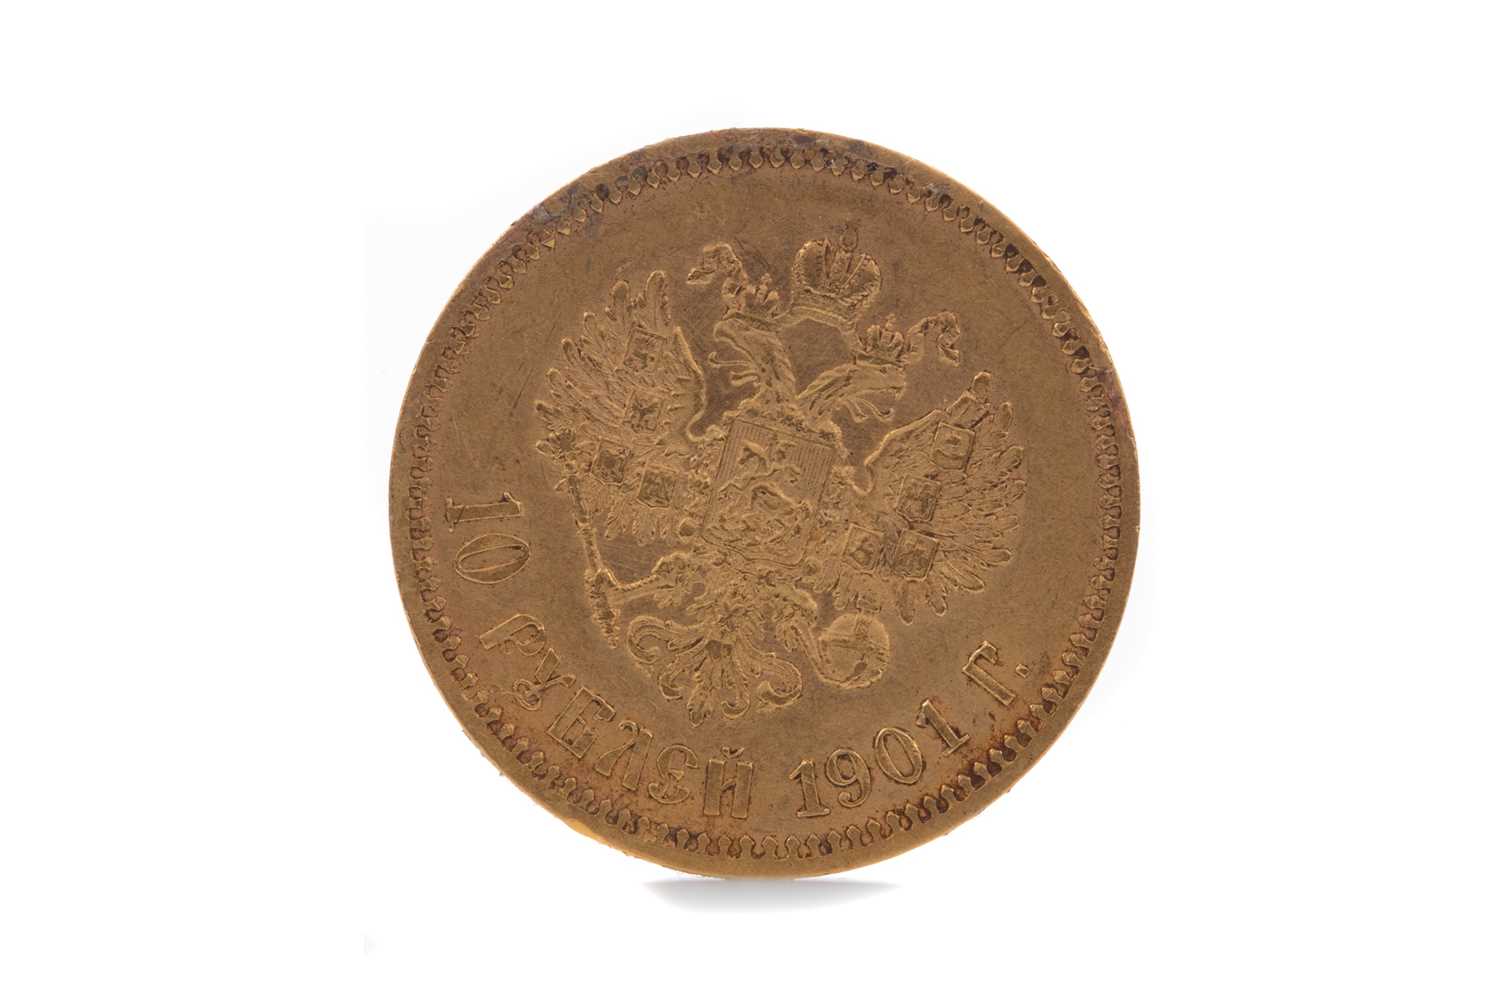 Lot 10 - A GOLD 10 RUBLE COIN DATED 1901